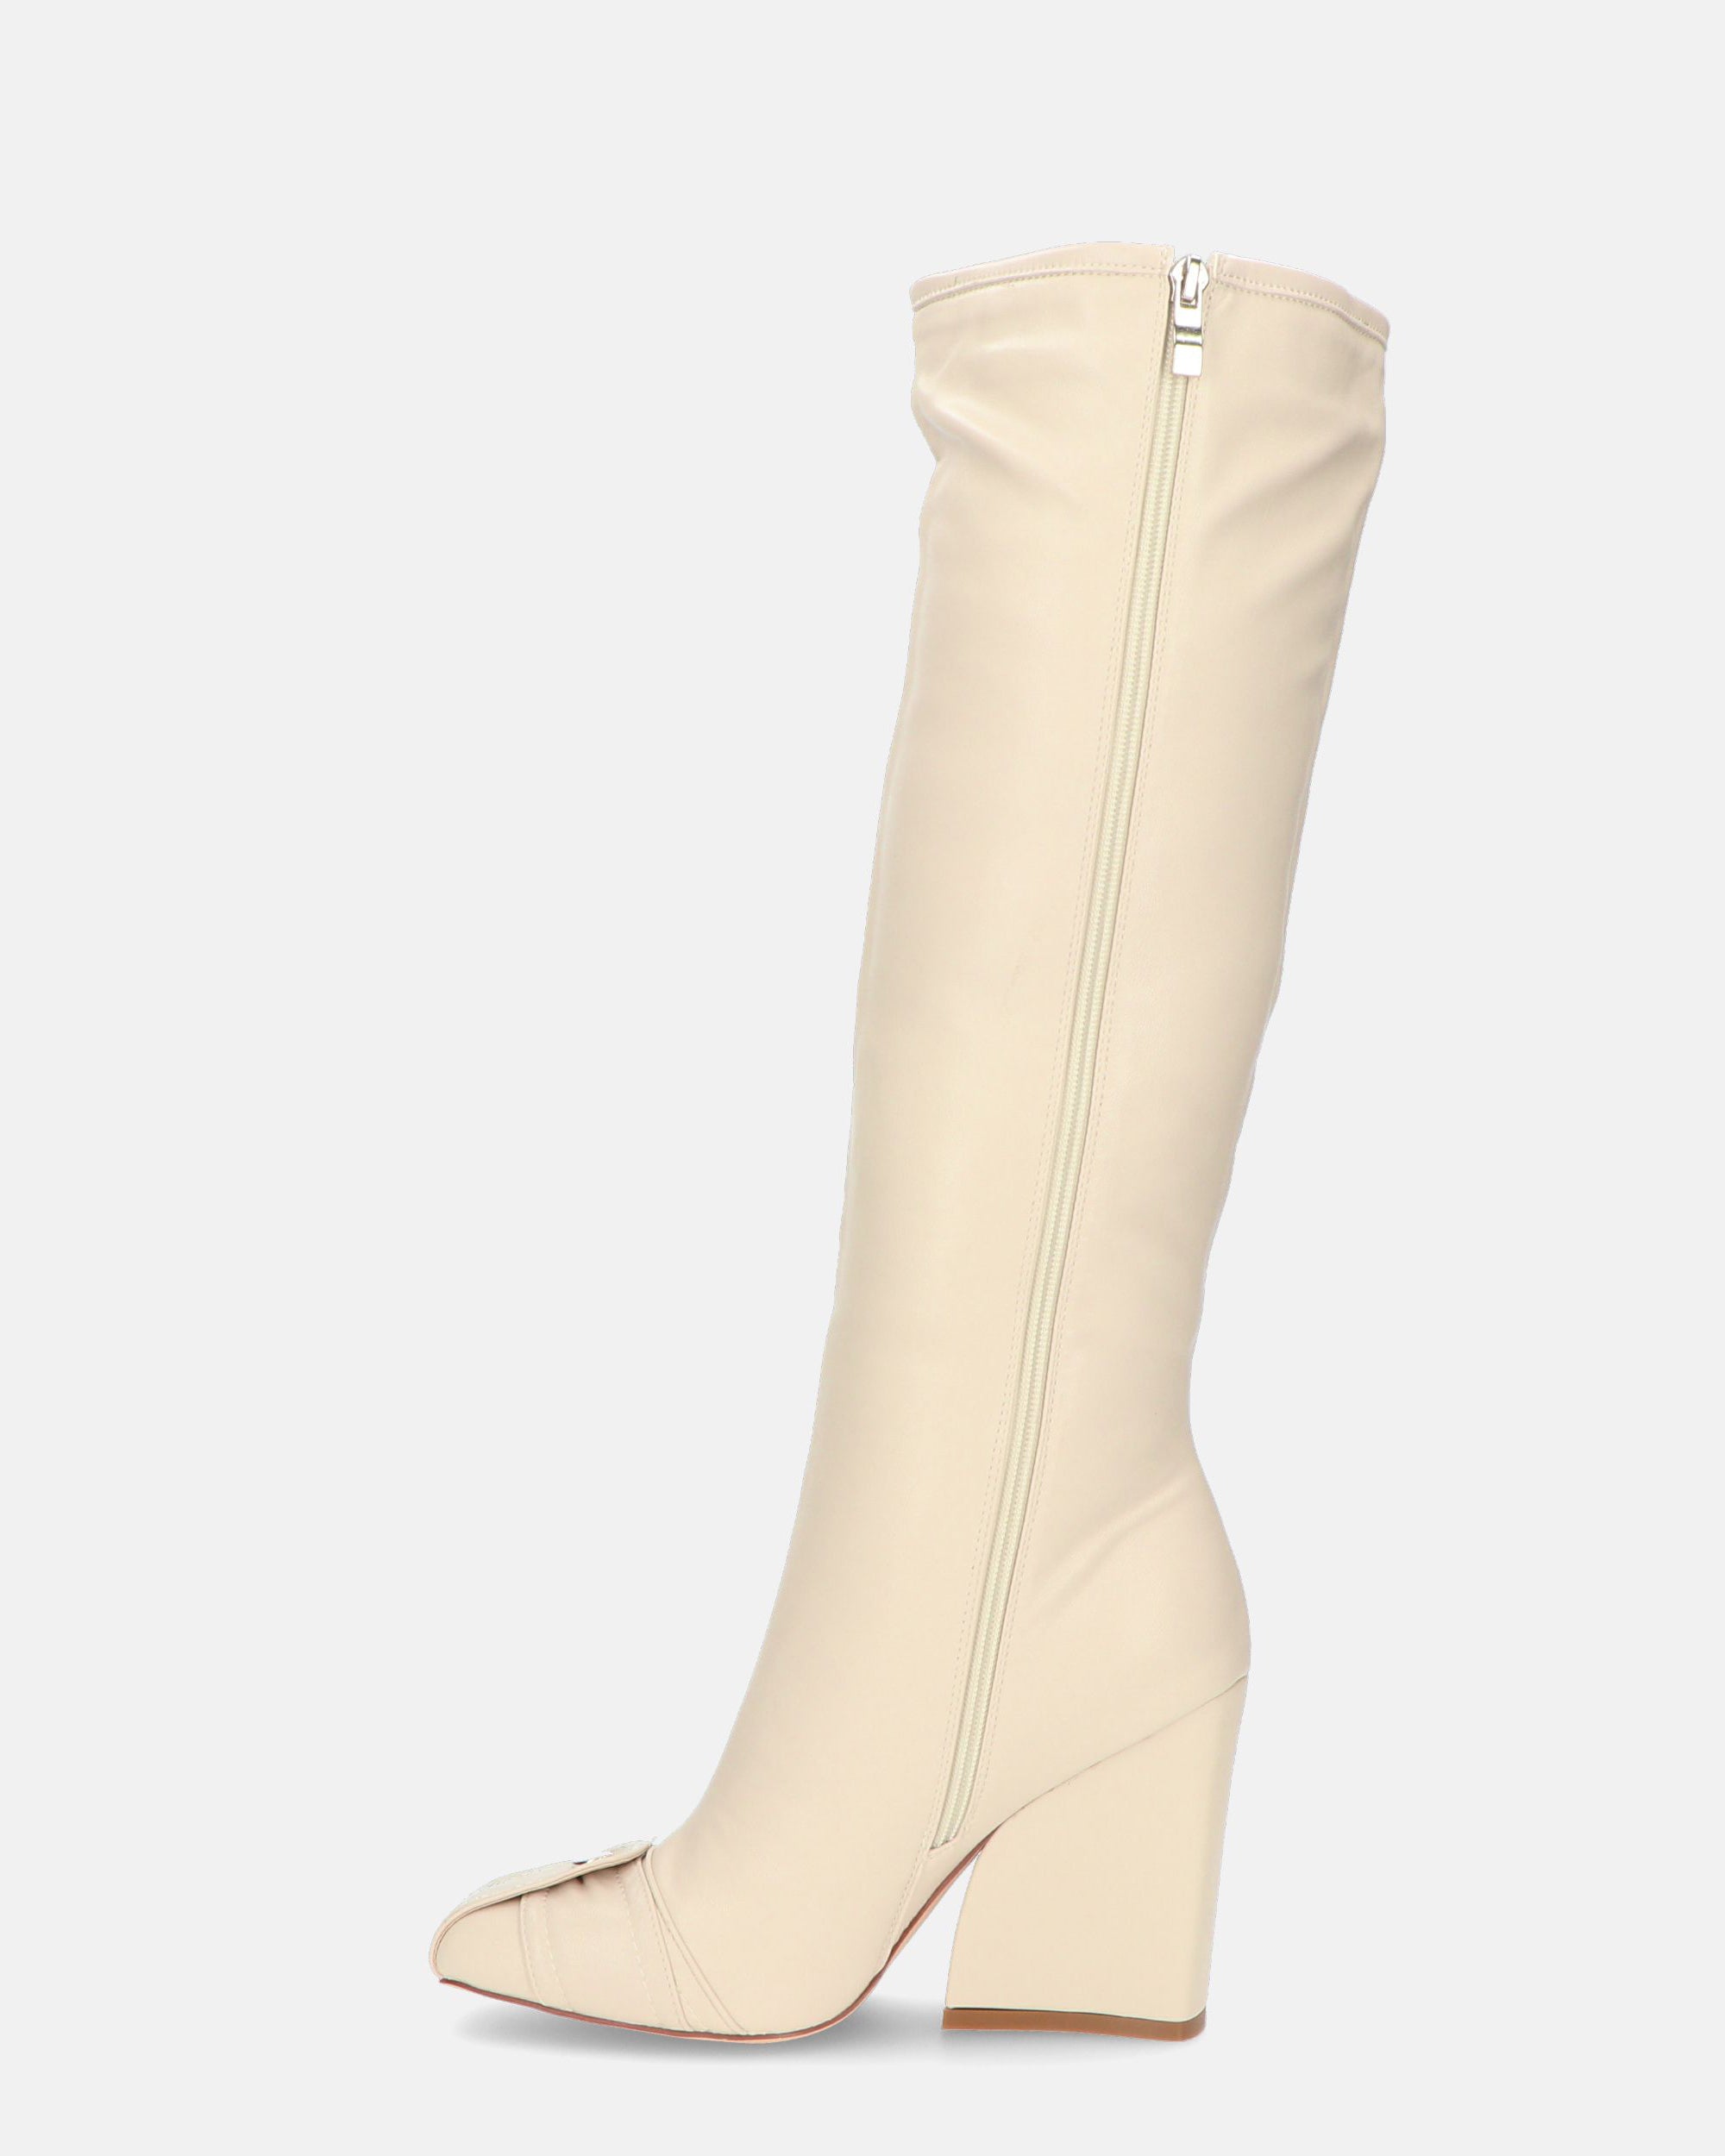 DEVA - beige high boots with zippers and square heel